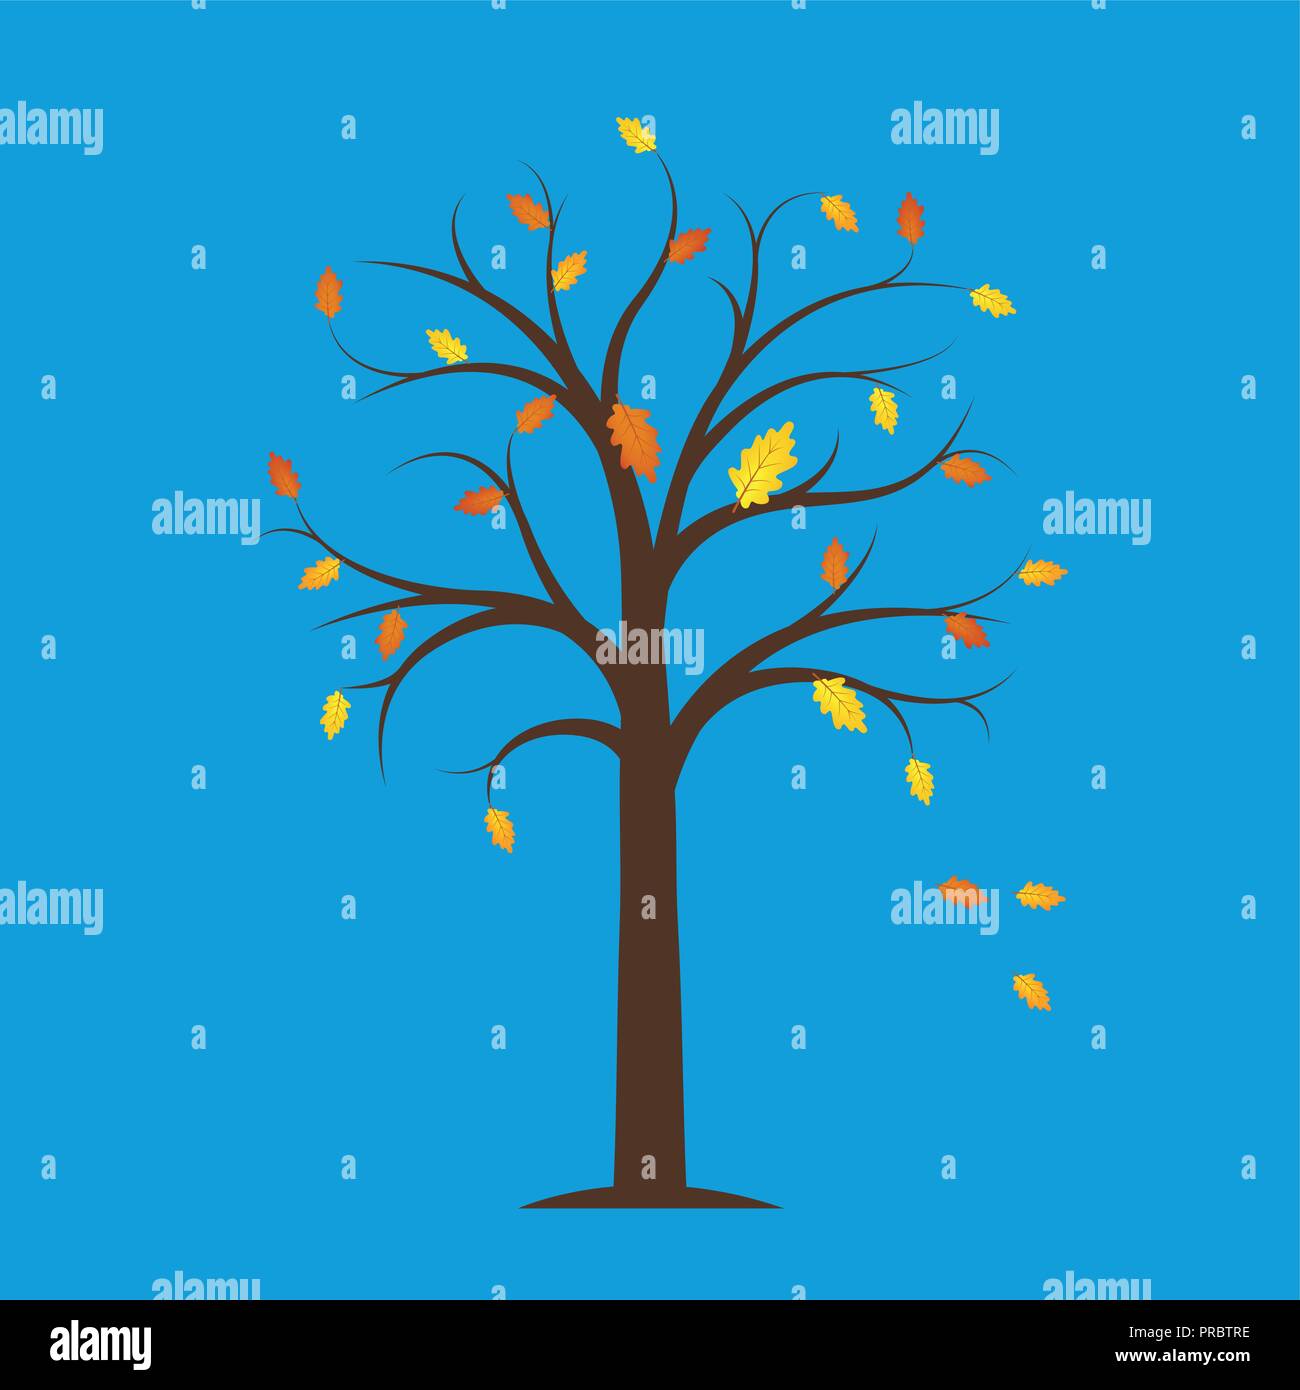 autumn tree with yellow and orange fallen leaves on a blue background vector illustration EPS10 Stock Vector